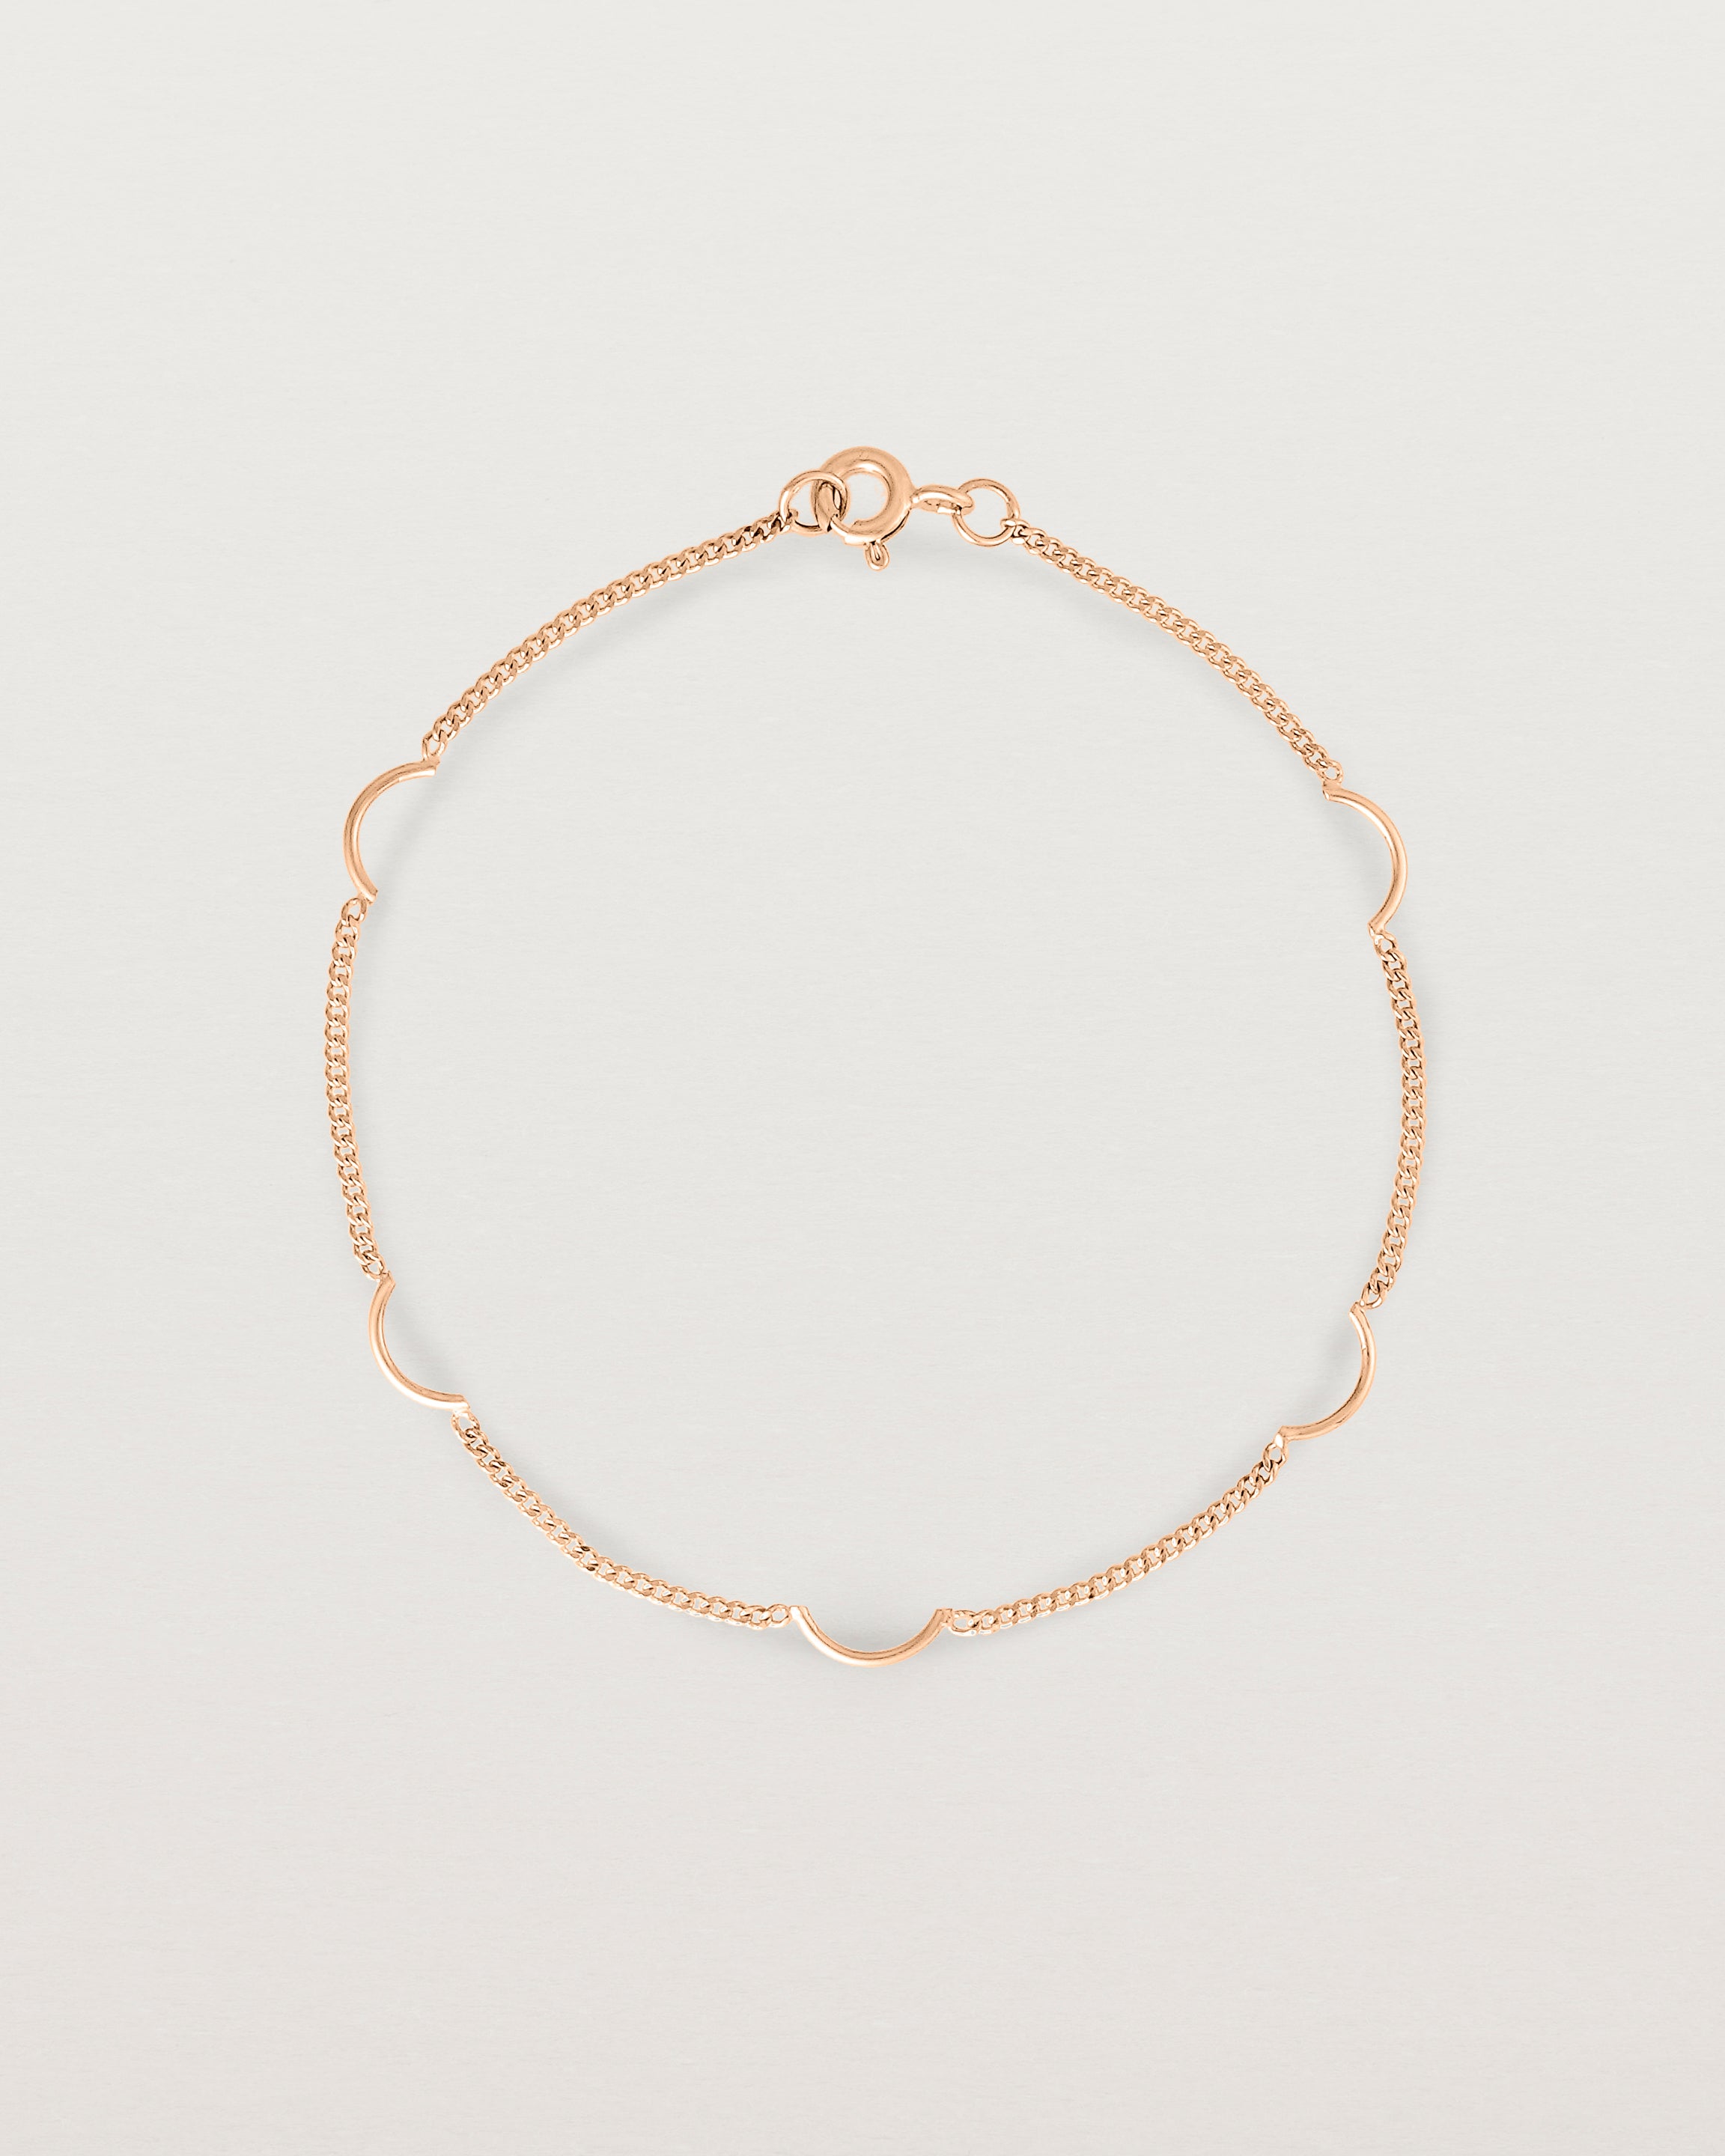 A rose gold chain bracelet with five gold arcs